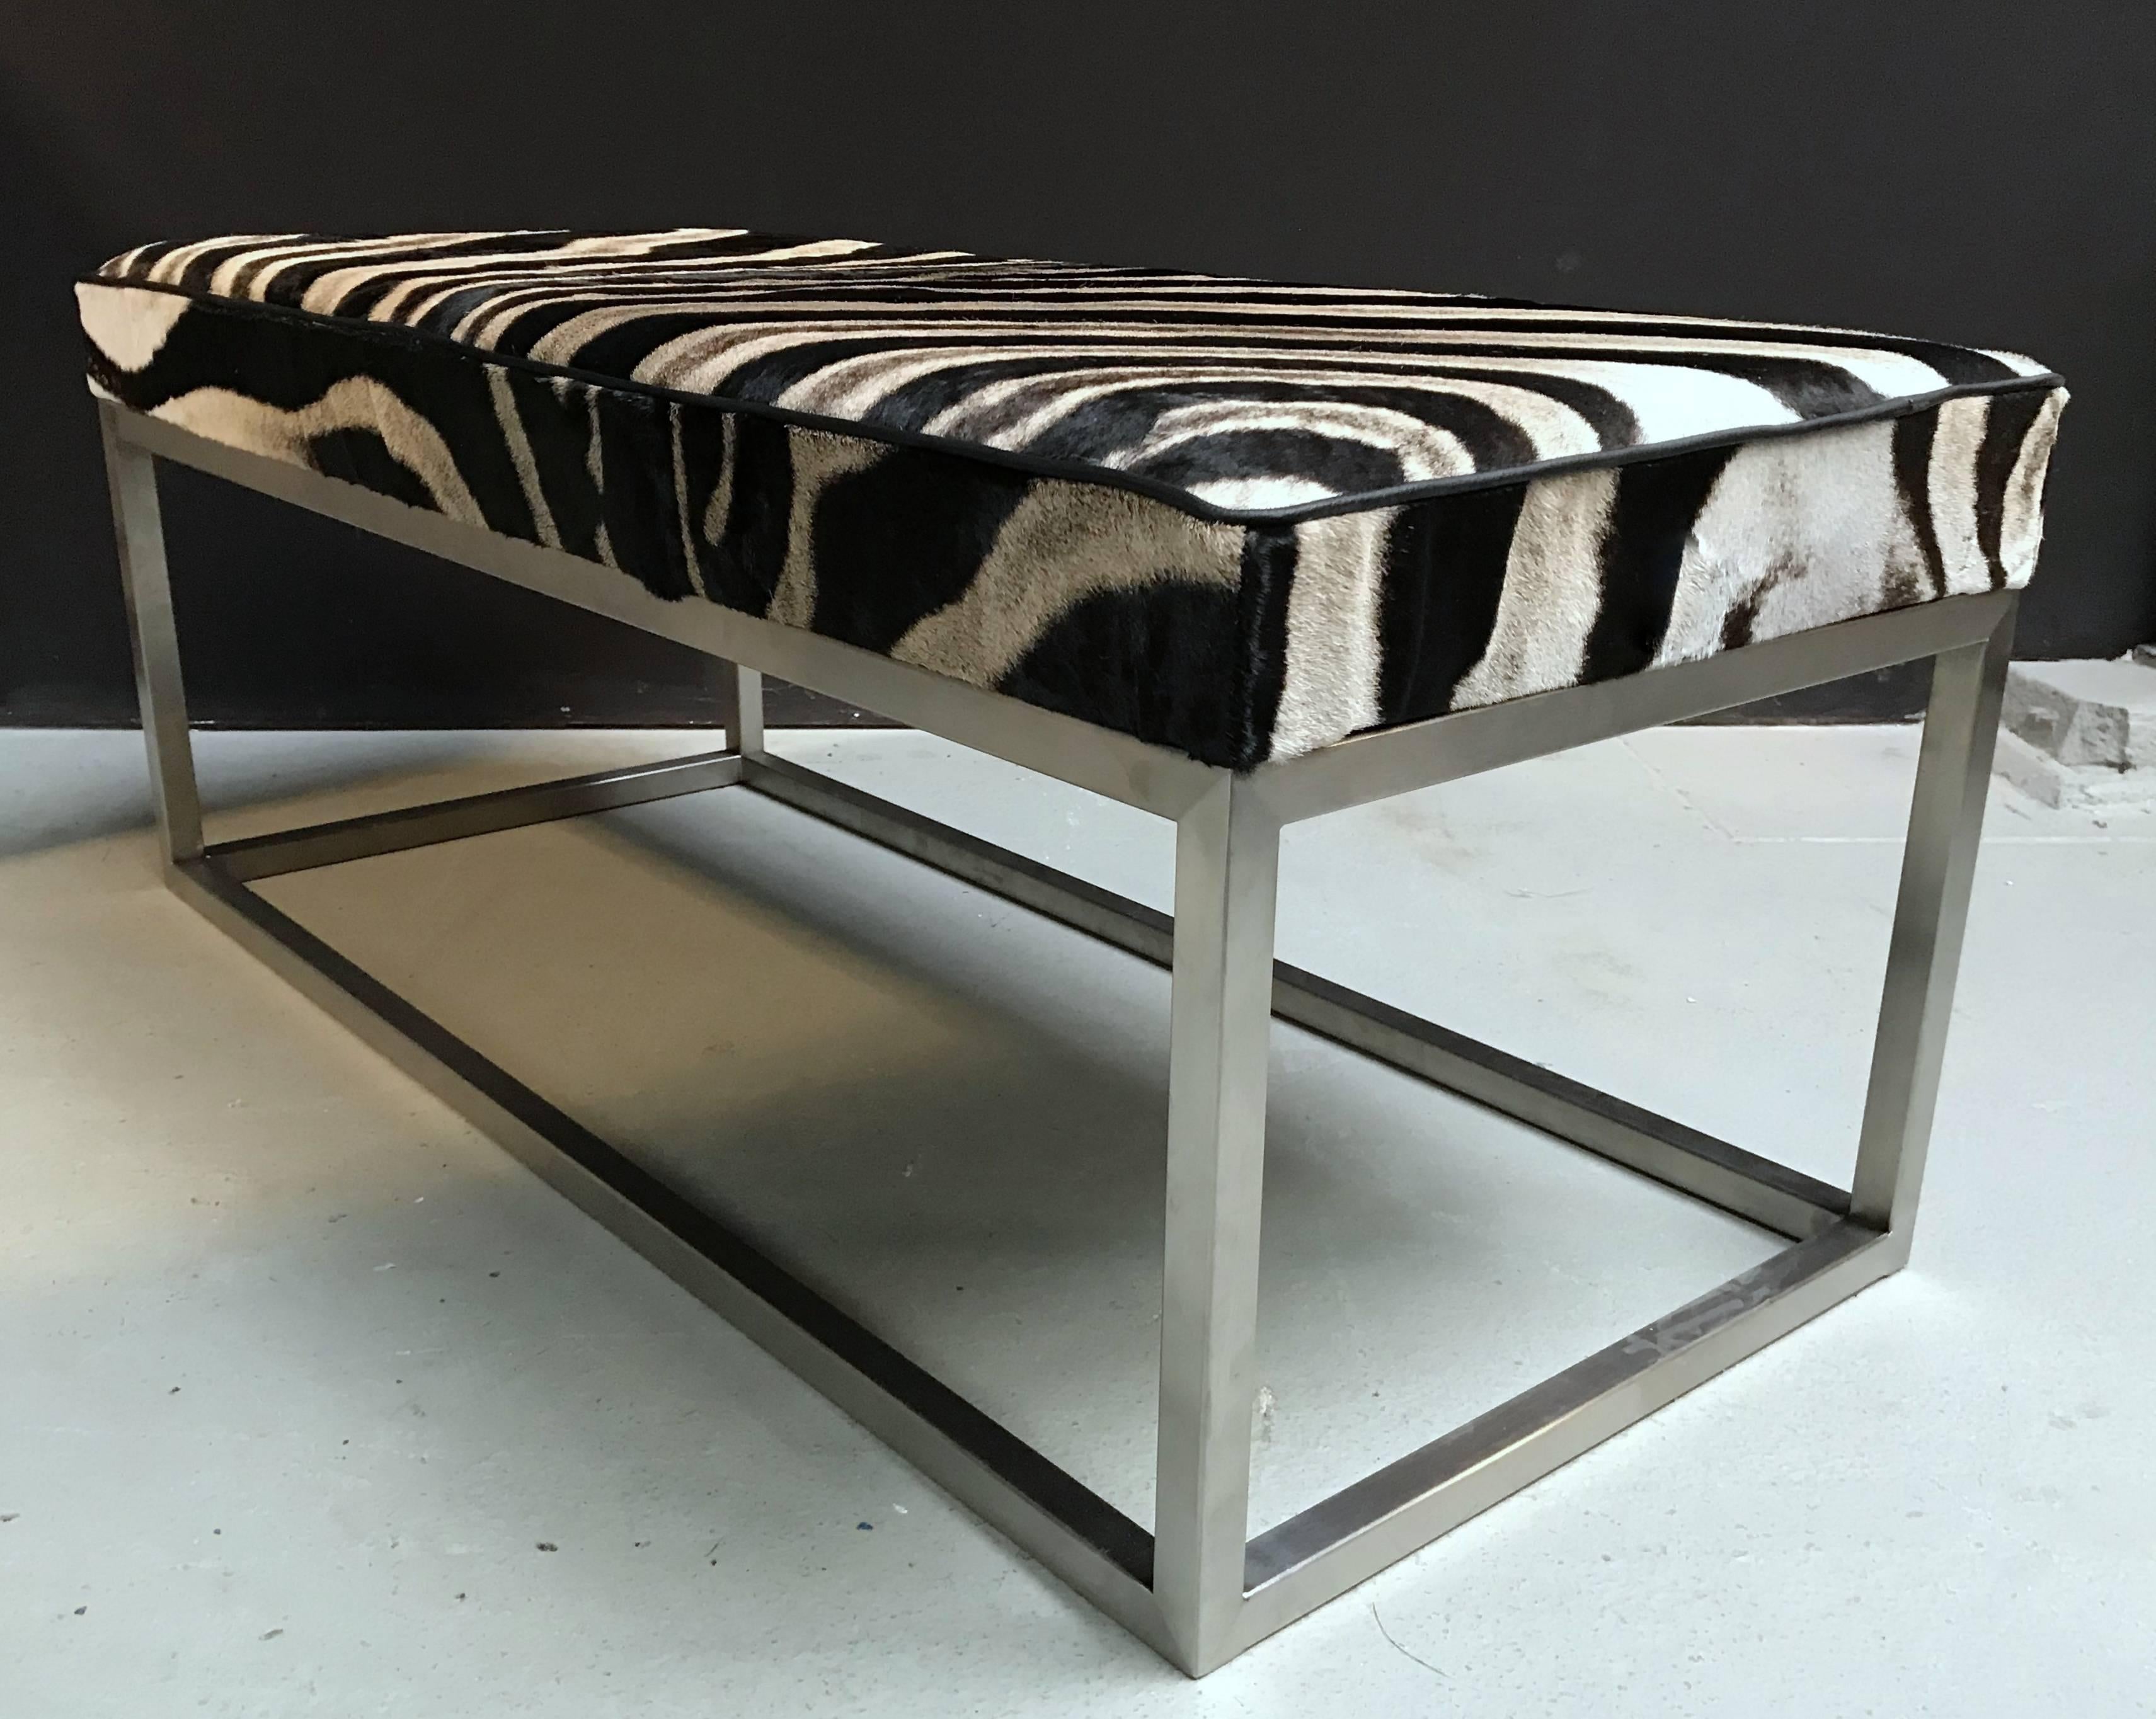 Elegant coffee table, top Burchell zebra skin with a black leather piping on the edges.
Stainless steel frame. These can also be made in other sizes.

 